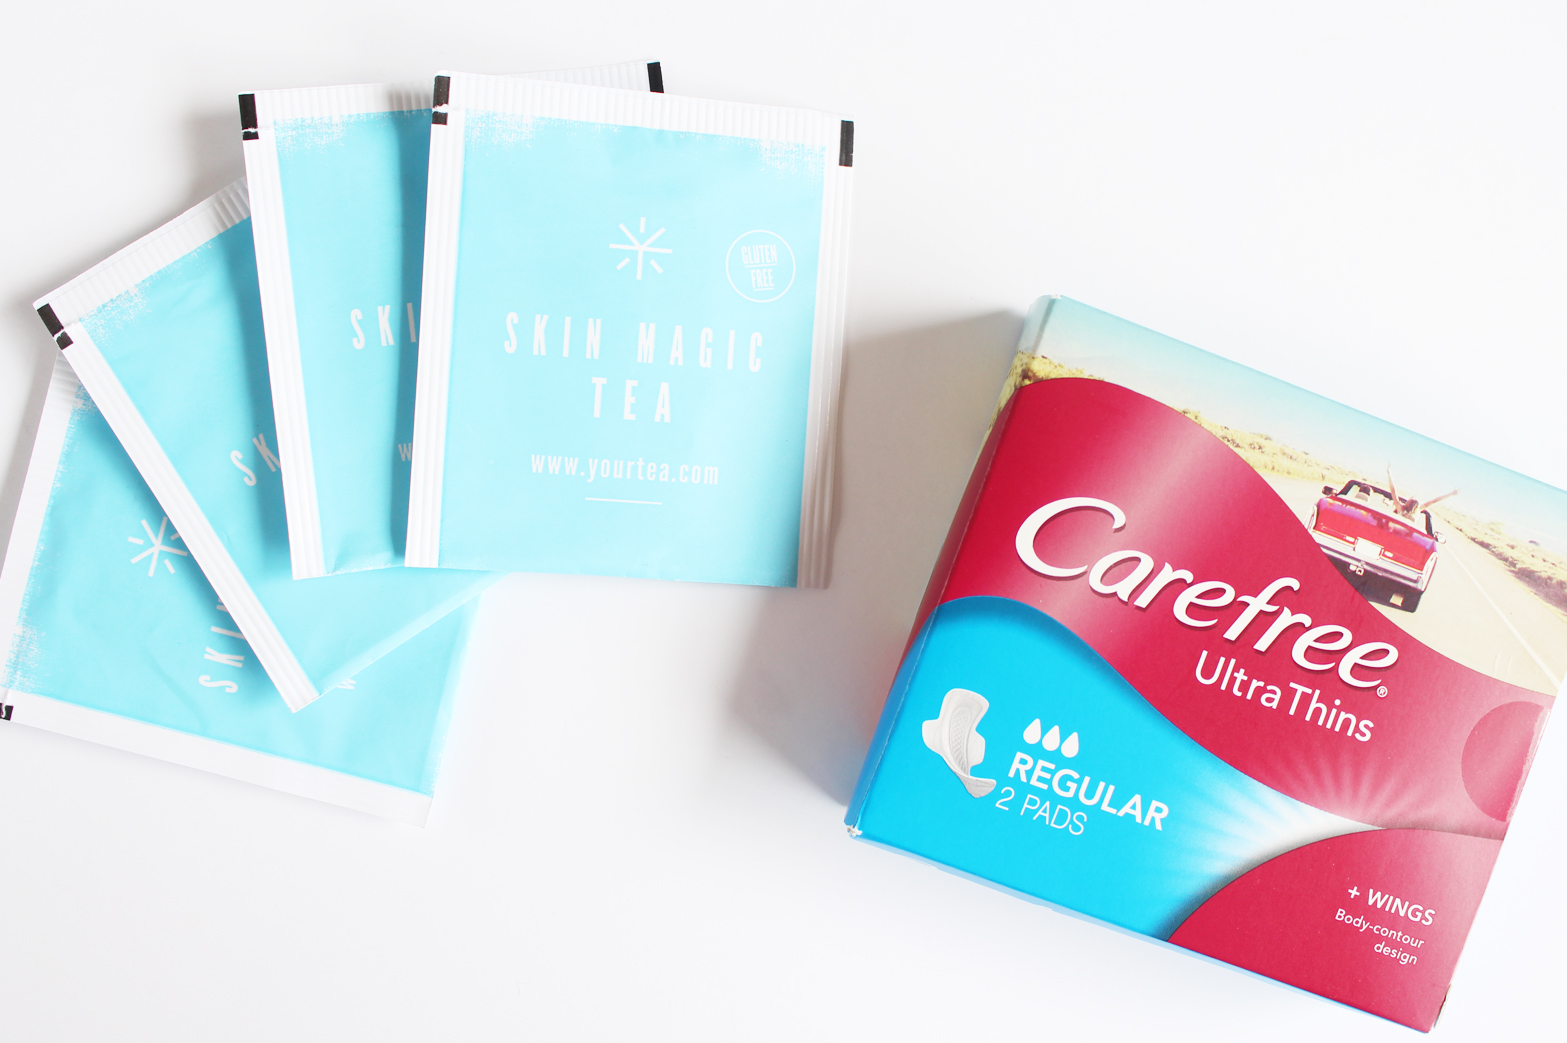 LUST HAVE IT | Women's Beauty Box November '15 - Unboxing + Initial Thoughts - CassandraMyee